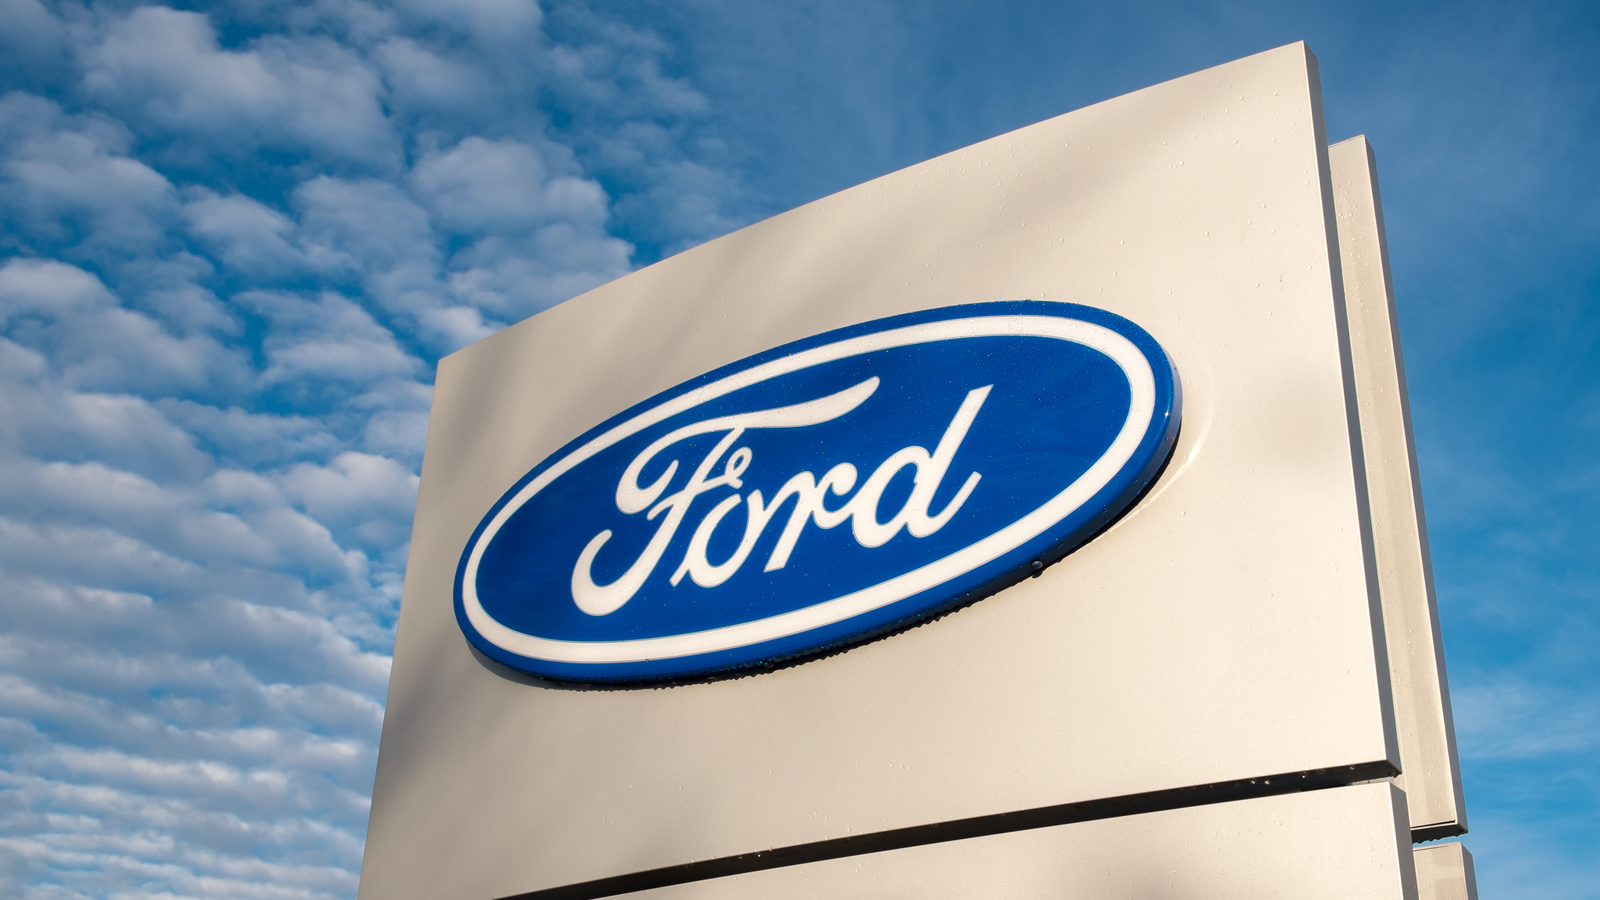 Ford dealership sign against a blue sky representing F Stock.